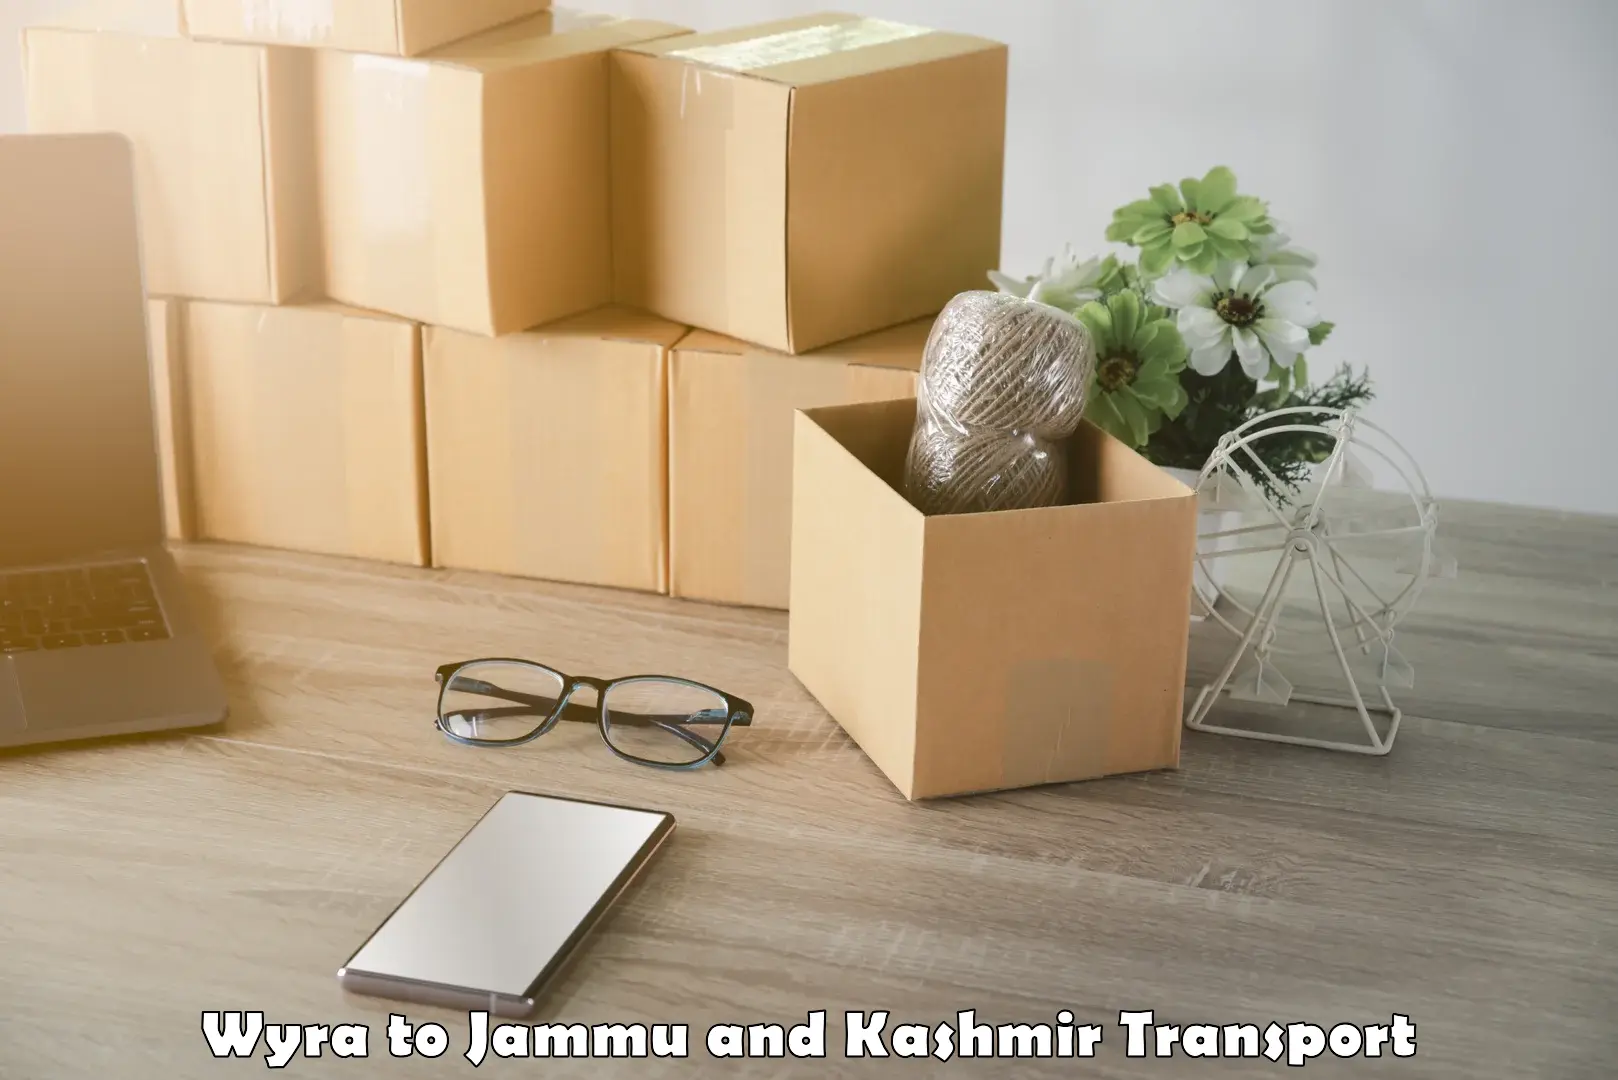 Express transport services in Wyra to Jammu and Kashmir